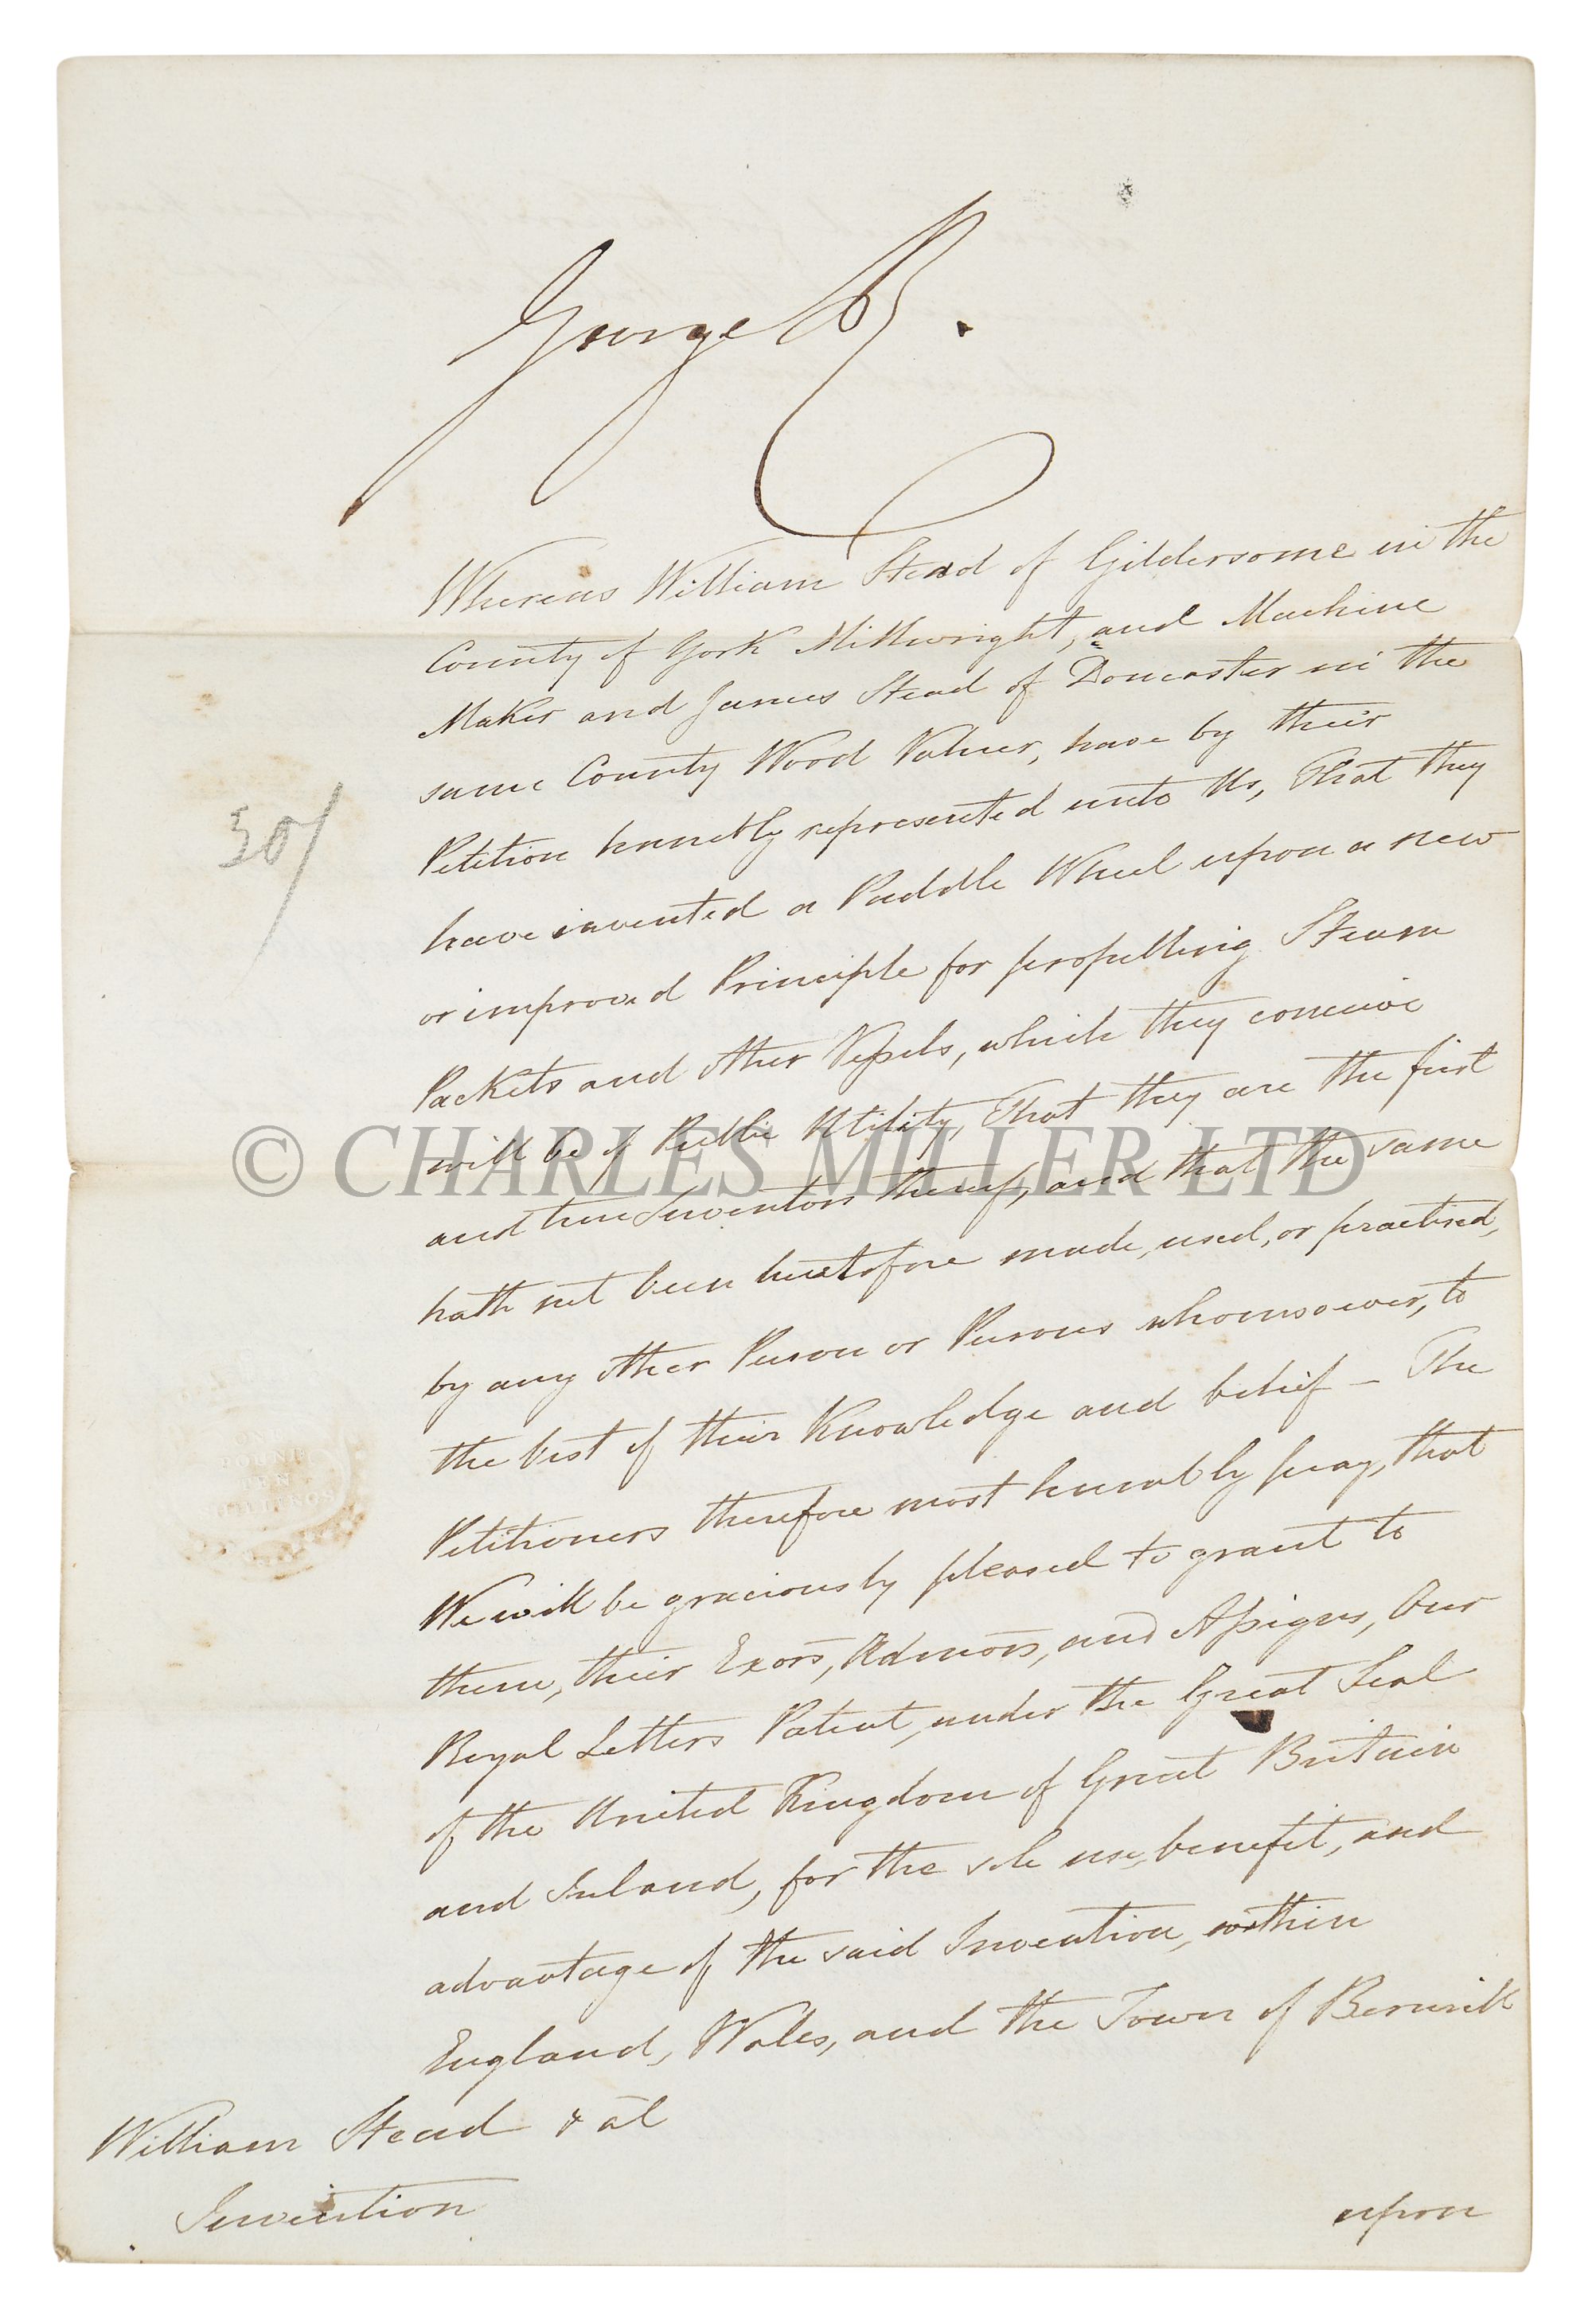 A GRANT OF PATENT FOR A 'NEW FORM OF PADDLE WHEEL' SIGNED BY GEORGE IV, 1828